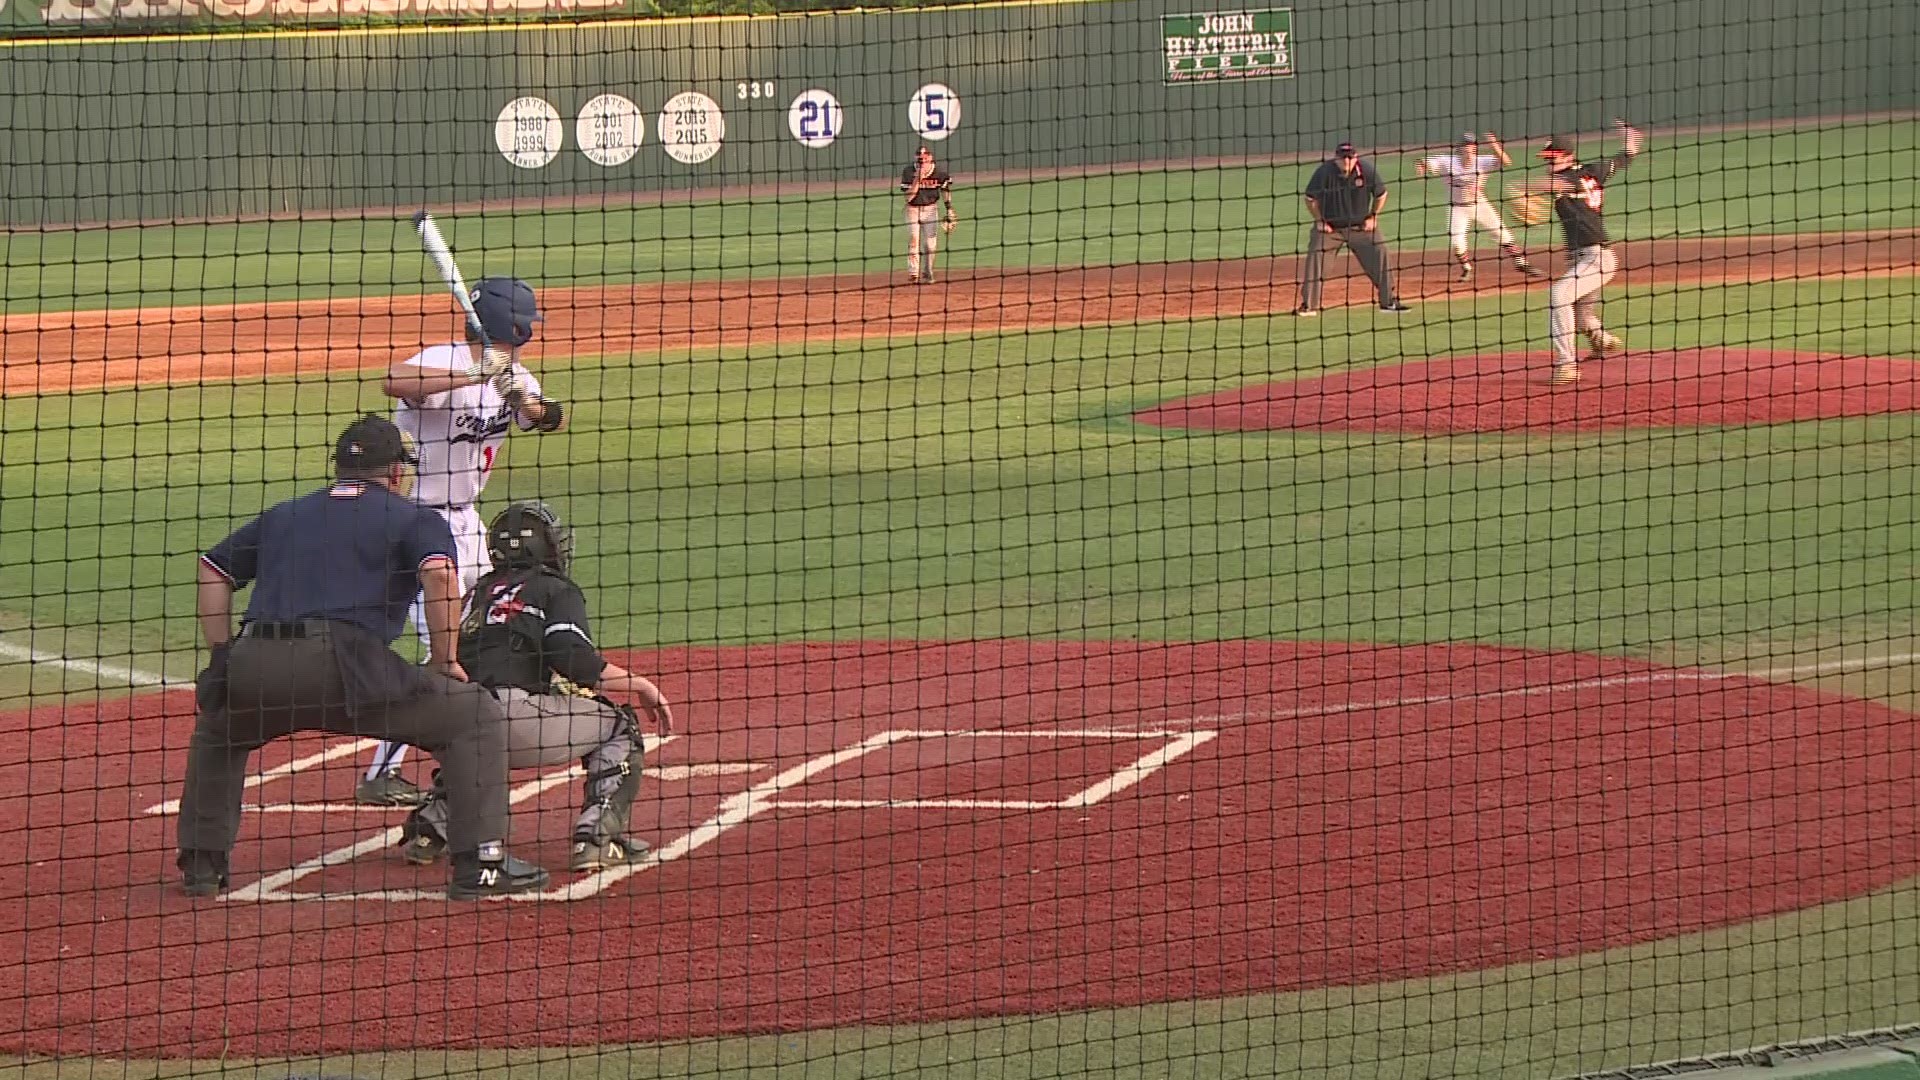 Extended highlights from Farragut's 13-9 win over Powell in the region semifinals. The Admirals trailed 6-0 in the third and scored 13 straight runs to advance to the region finals against the winner of Tuesday's Karns/Heritage game.